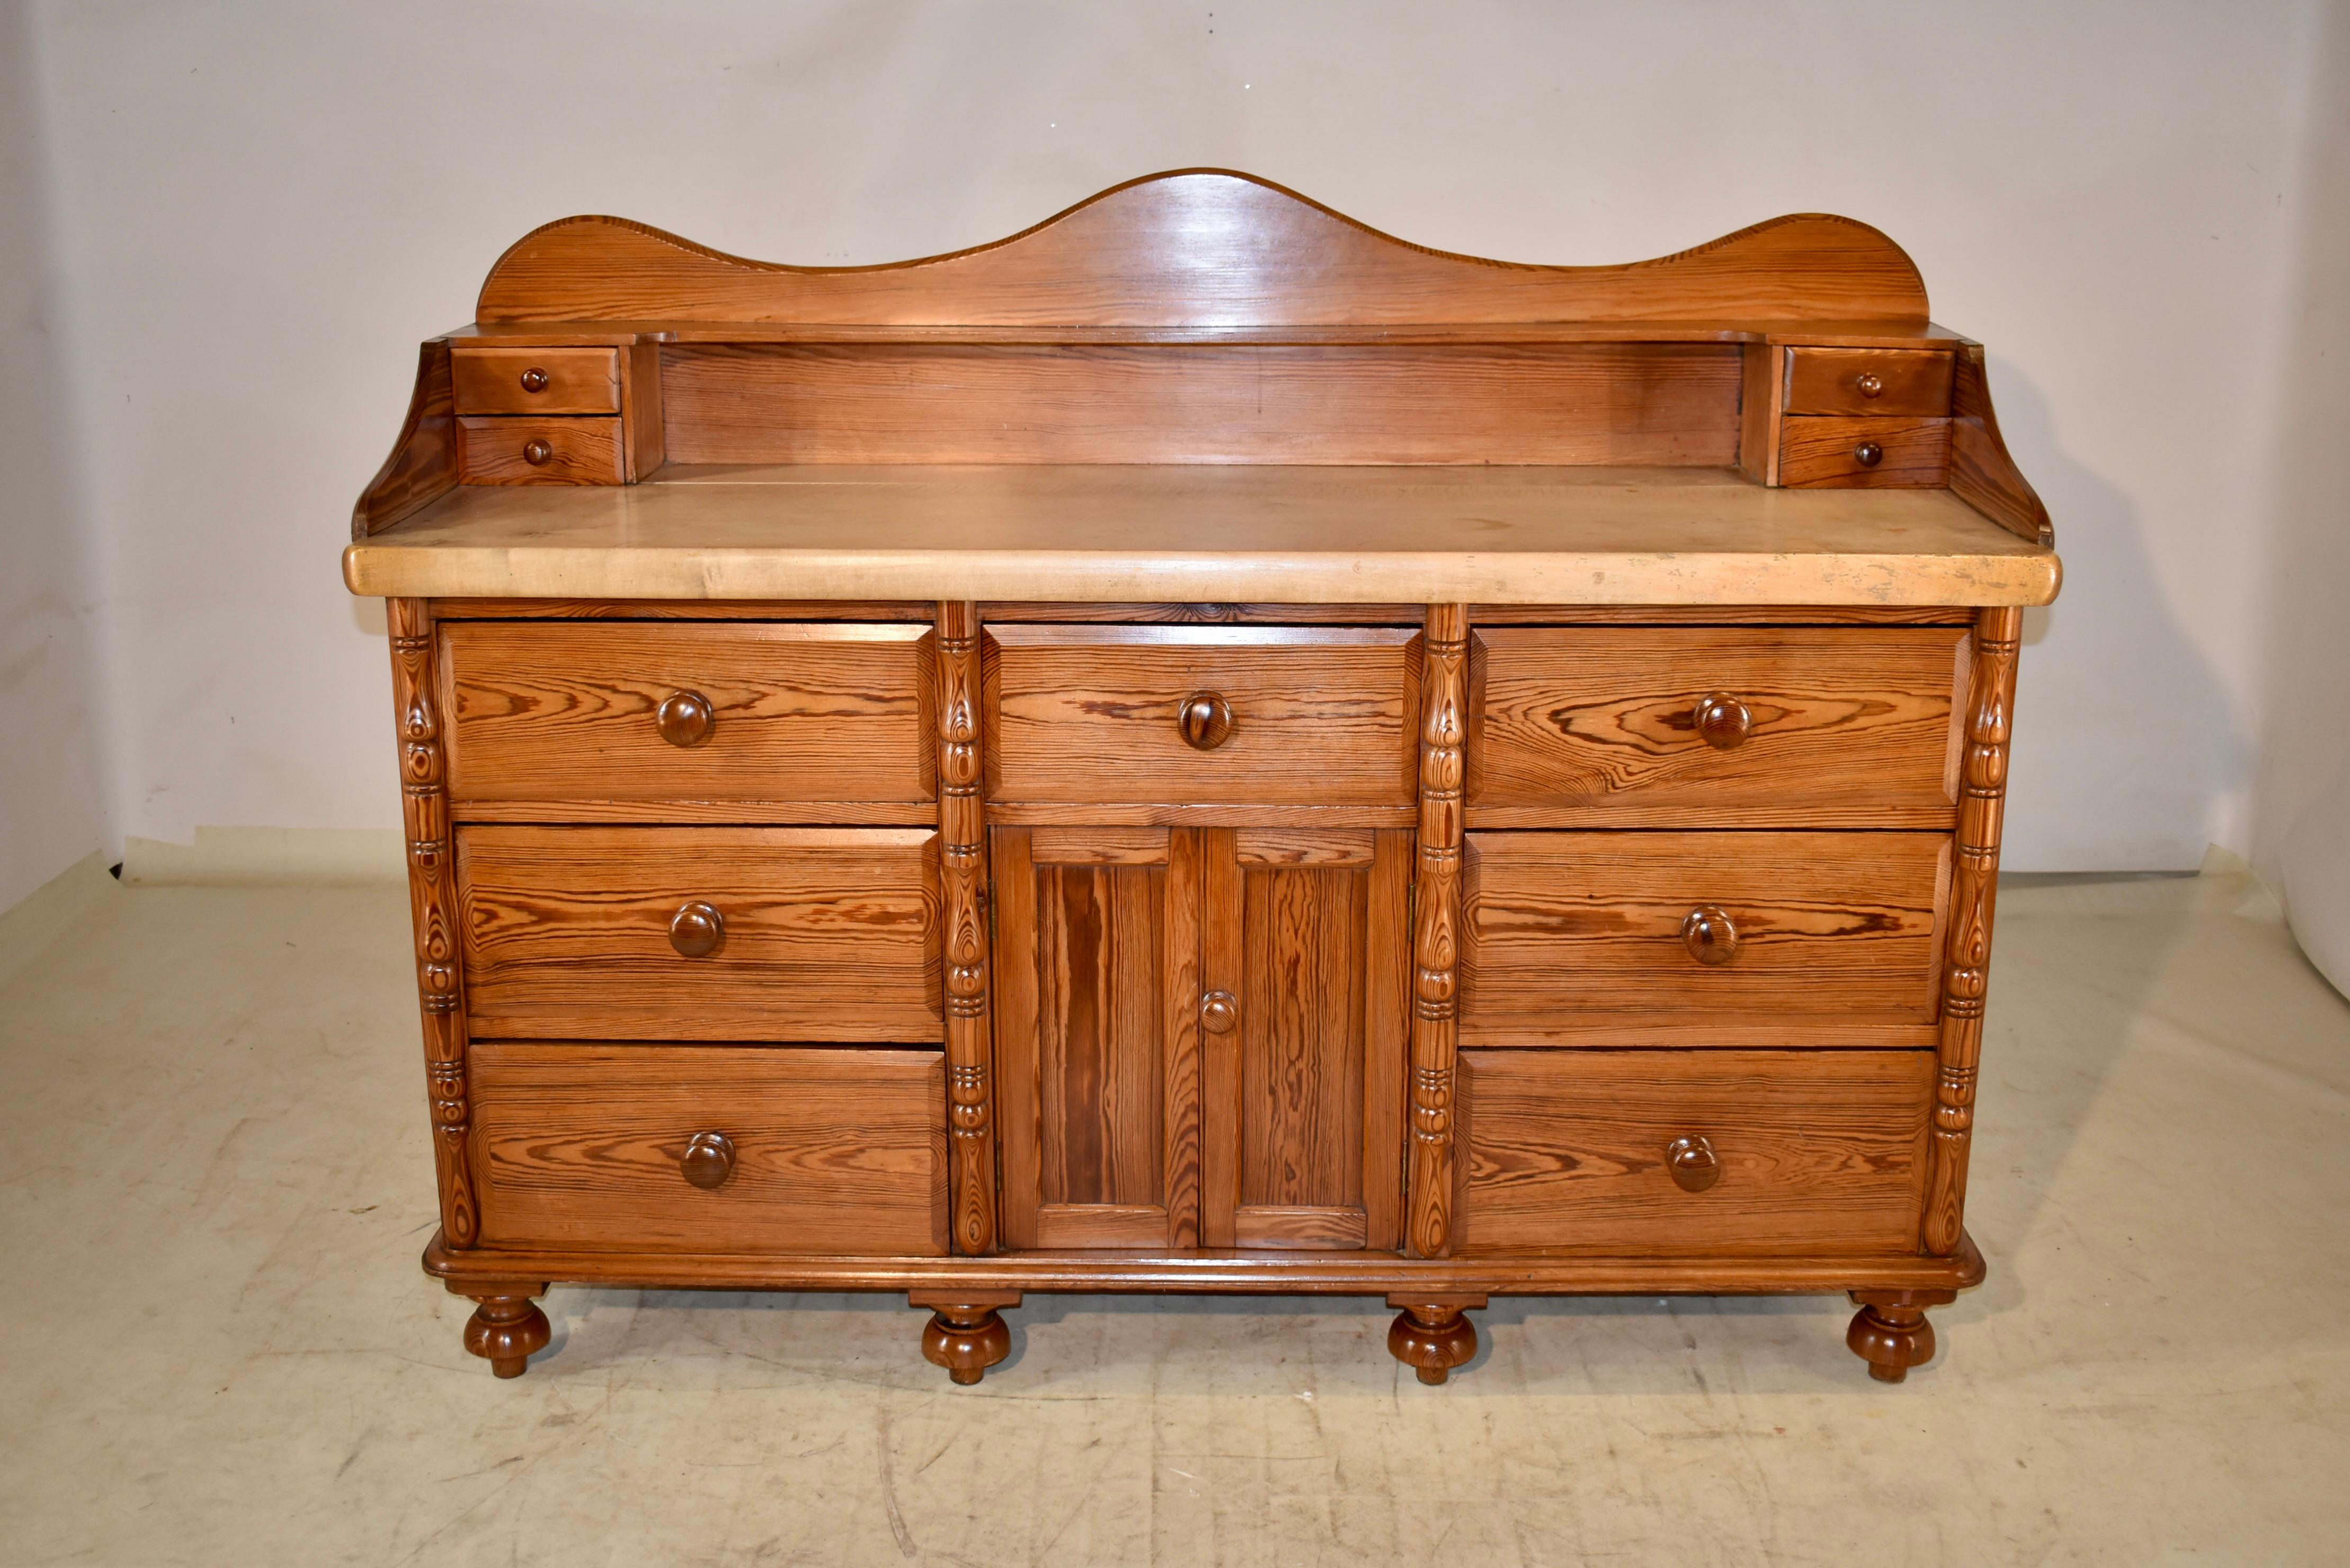 Early 19th century pitch pine sideboard with a gorgeous 2 inch thick sycamore top. The backsplash is scalloped and has a single shelf, which has set of drawers on either end of the piece. The serving surface is a 2 inch thick sycamore plank, which